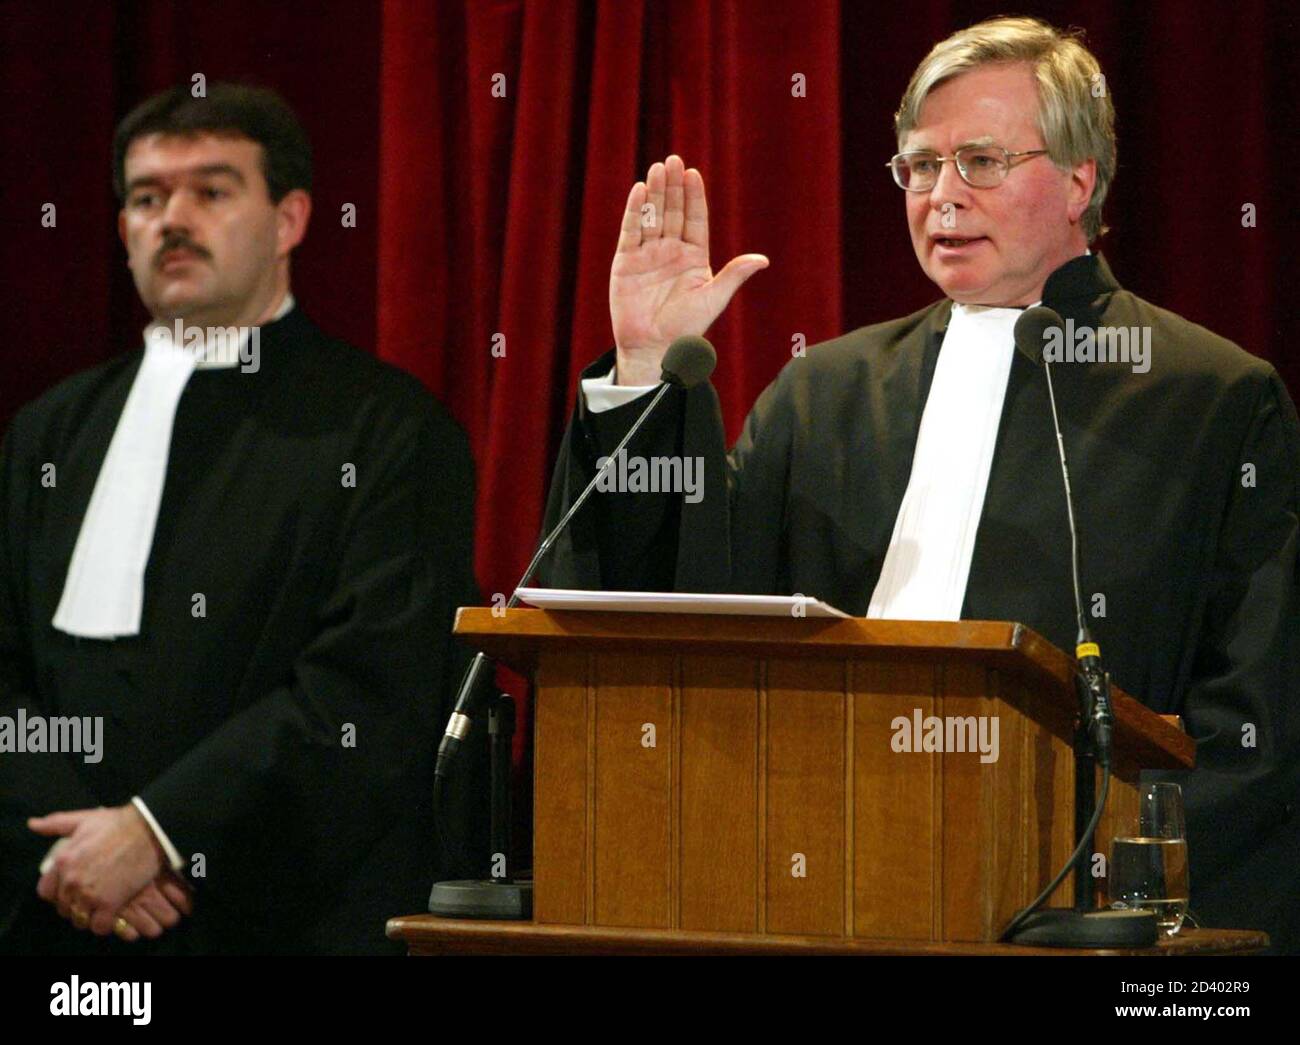 Canadian judge Philippe Kirsch, who was elected to be the first ICC  President, swears in during the inaugural ceremony of International  Criminal Court (ICC) in The Hague, The Netherlands, March 11, 2003.